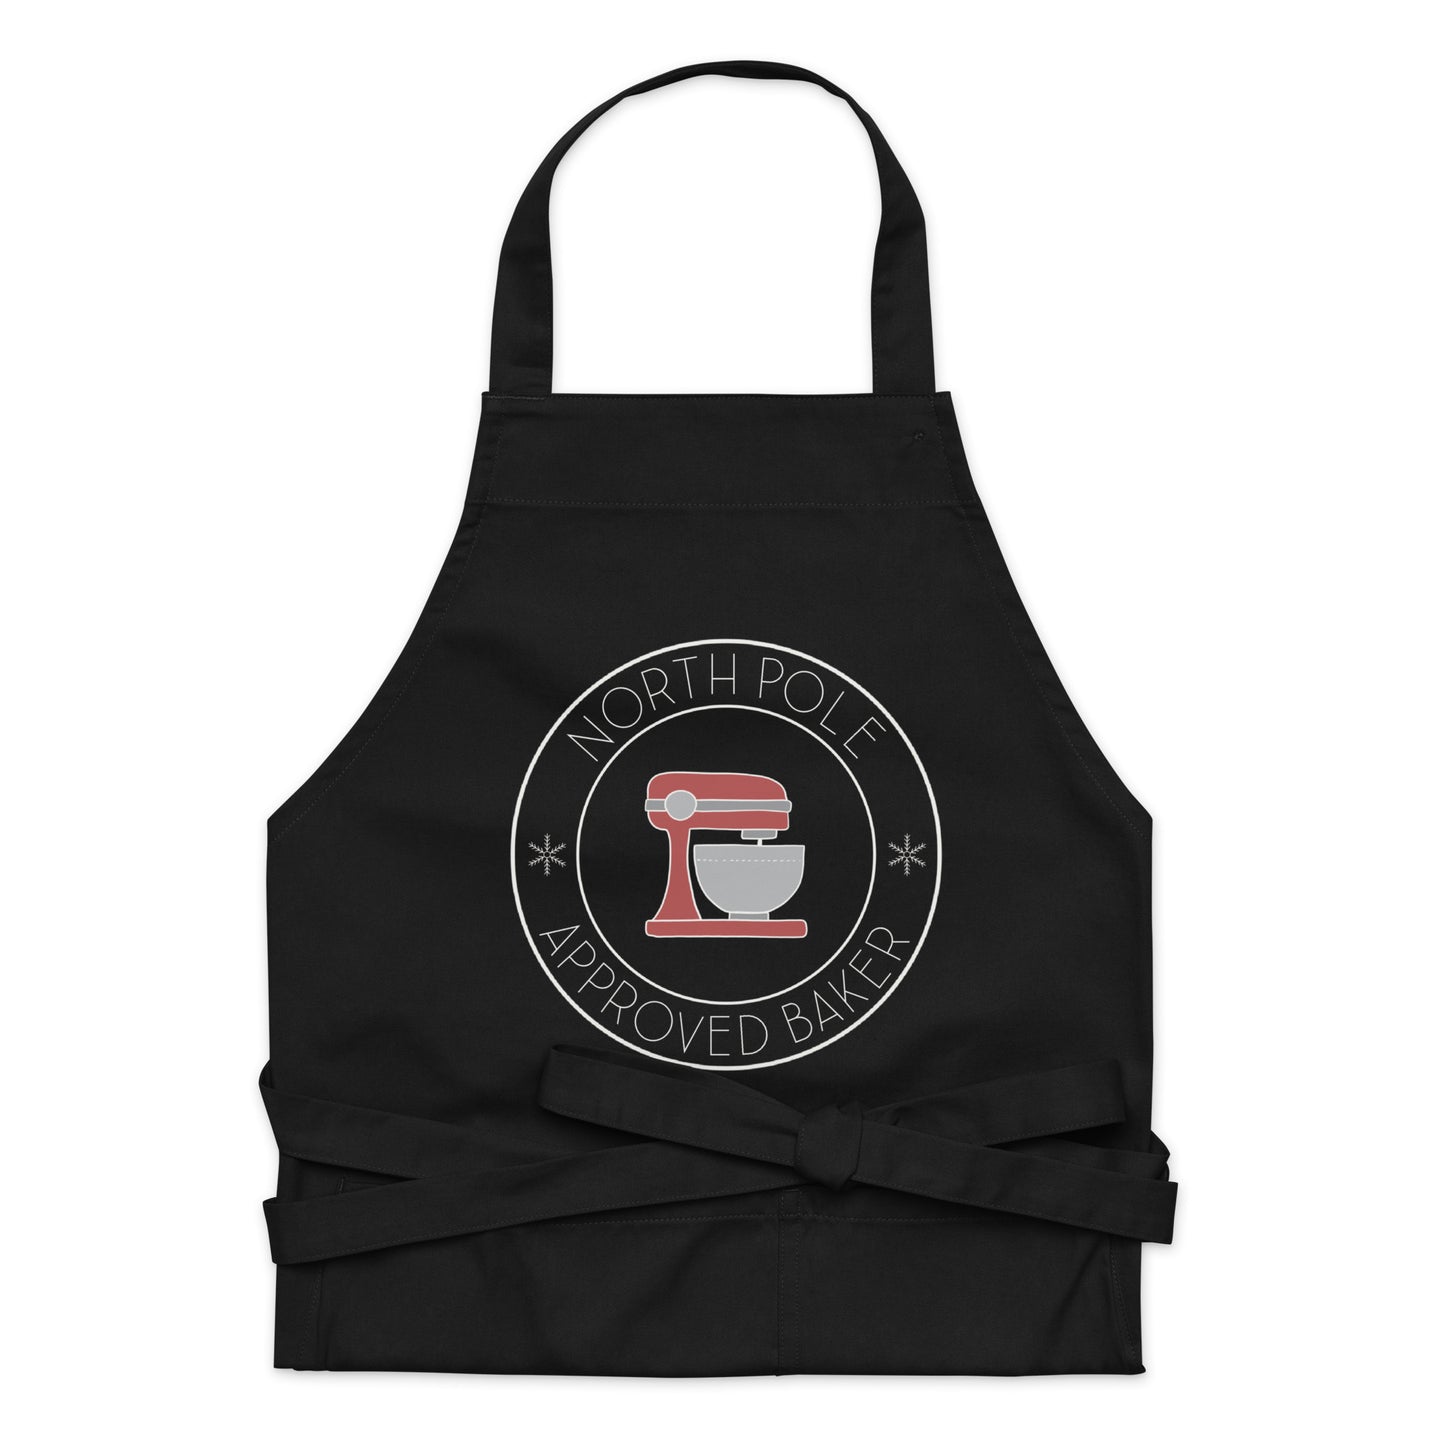 North Pole Approved Baker Organic Cotton Apron